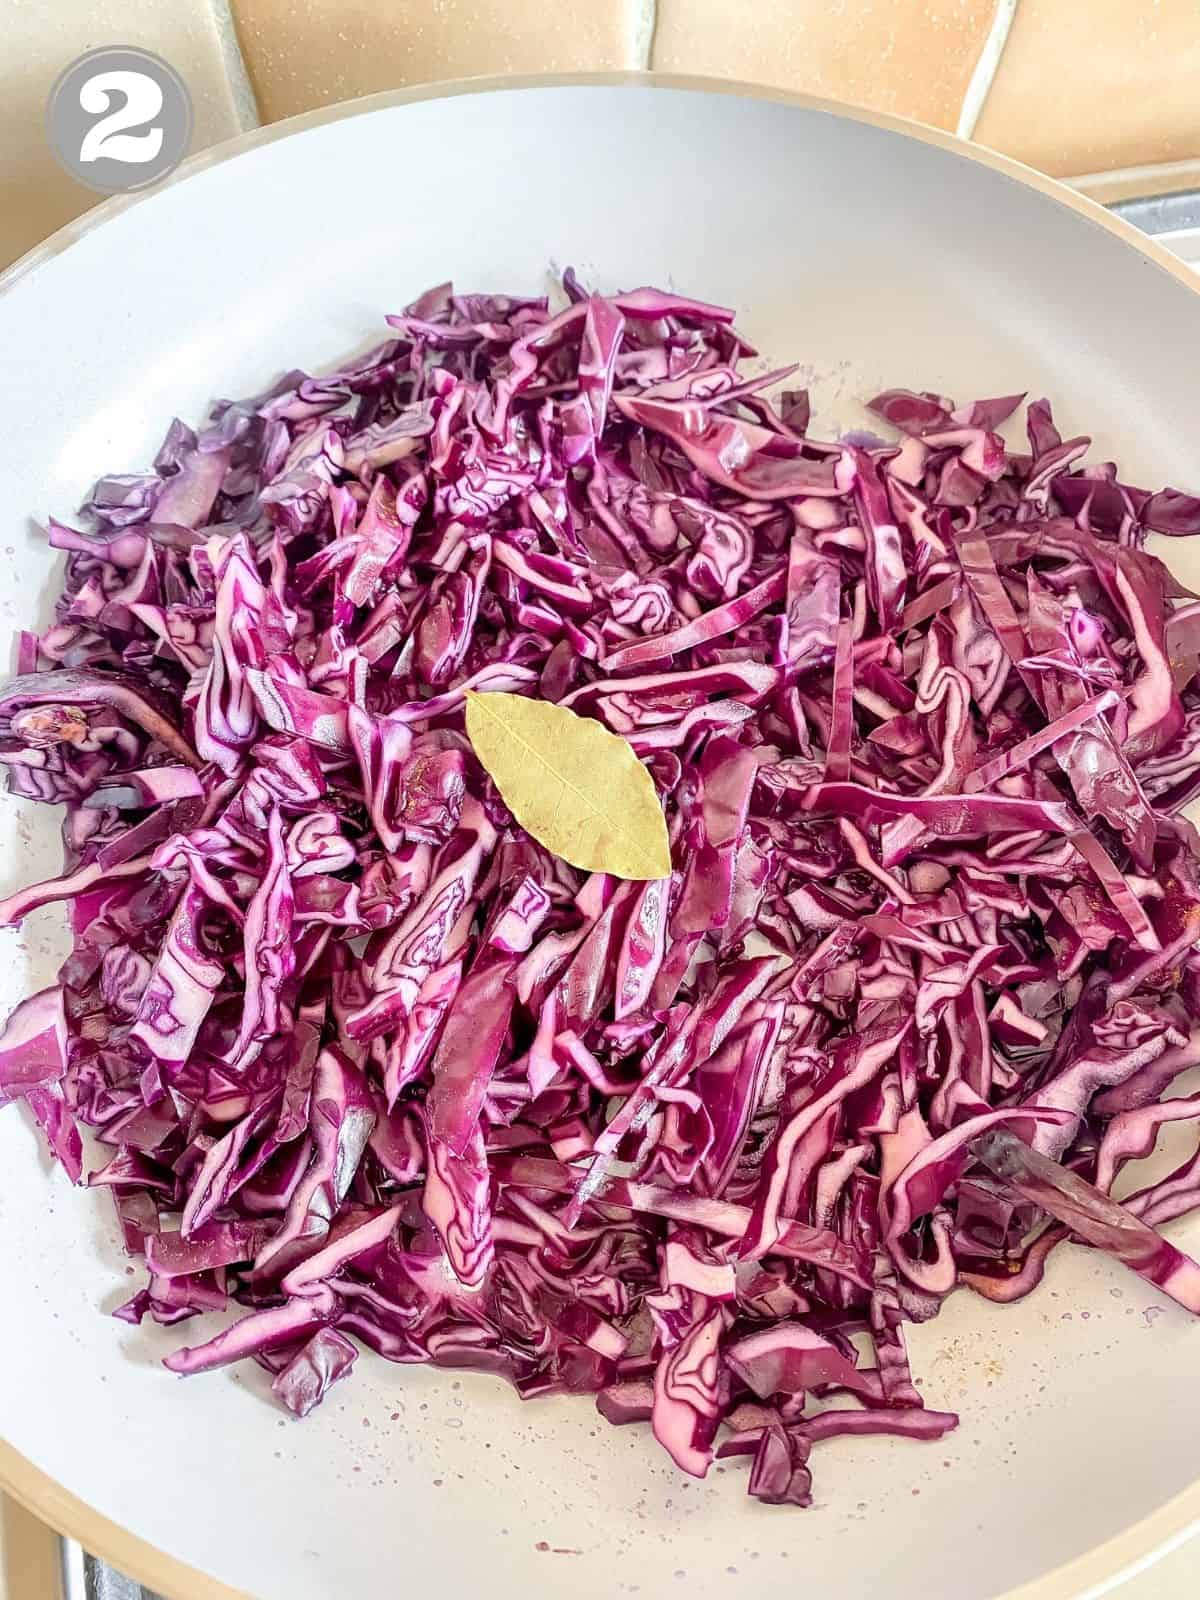 red cabbage and a bay leaf in a grey skillet.